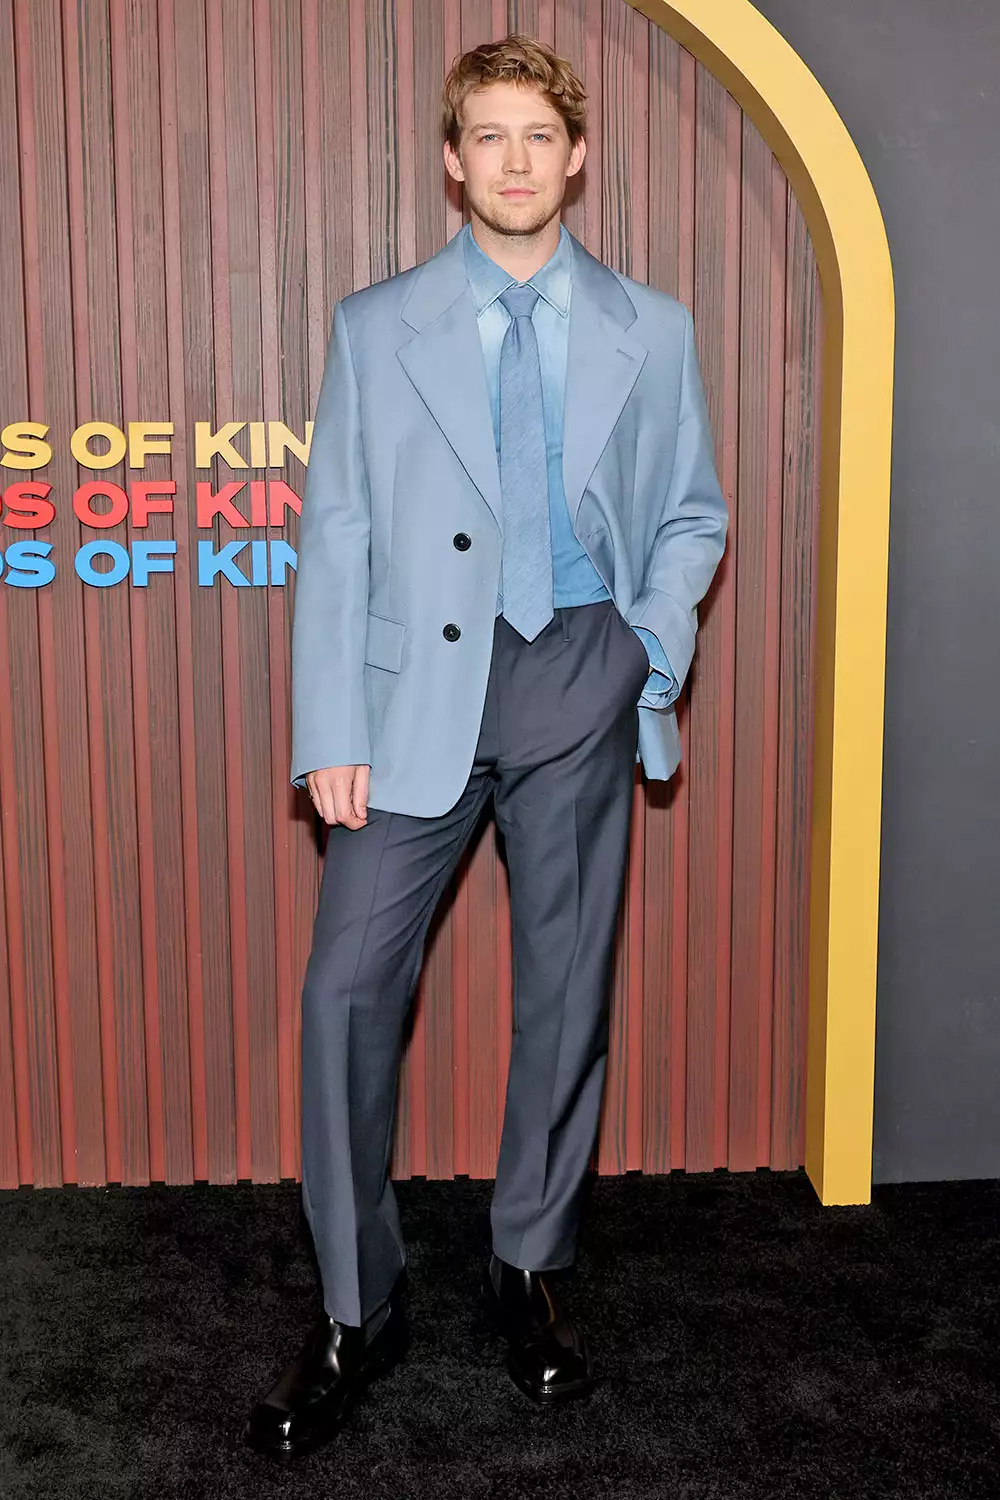 Joe Alwyn at the premiere of Kinds of Kindness five days after commenting on his breakup with Taylor Swift